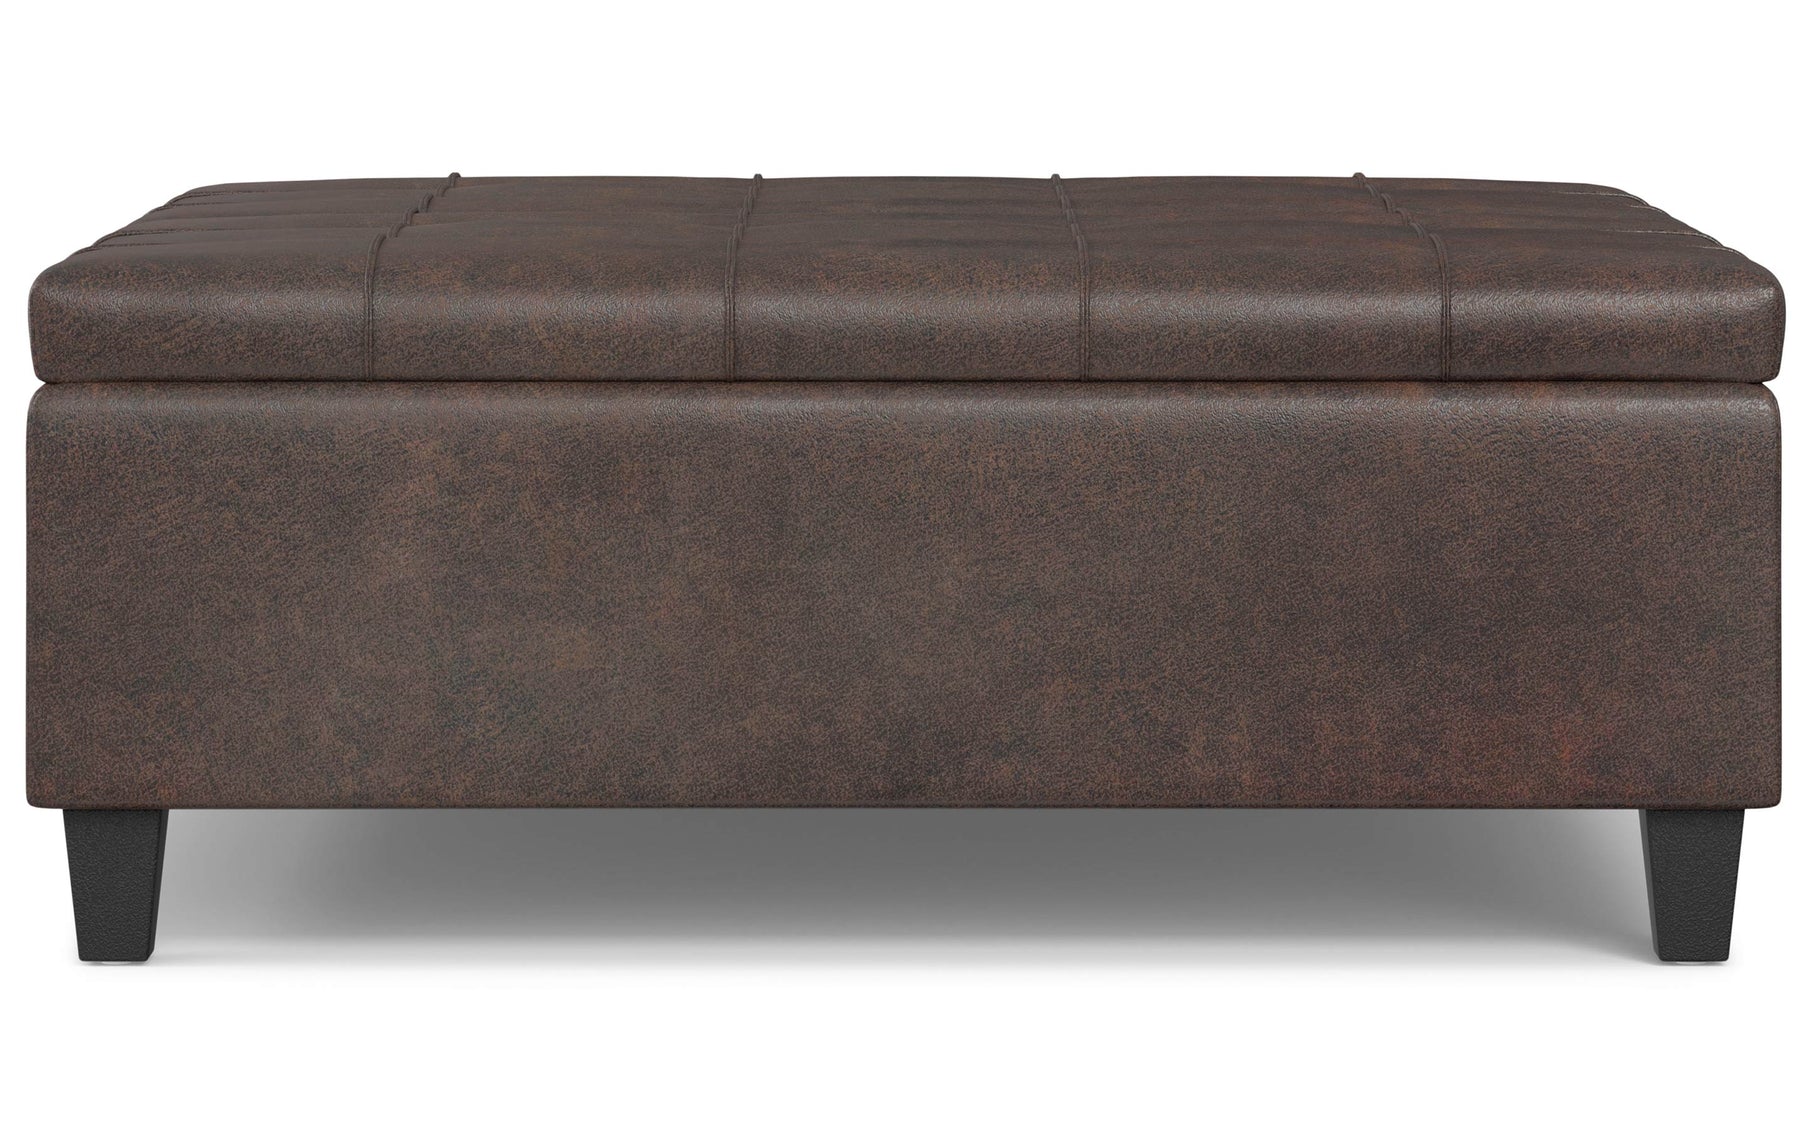 Distressed Brown Distressed Vegan Leather | Harrison Large Square Coffee Table Storage Ottoman